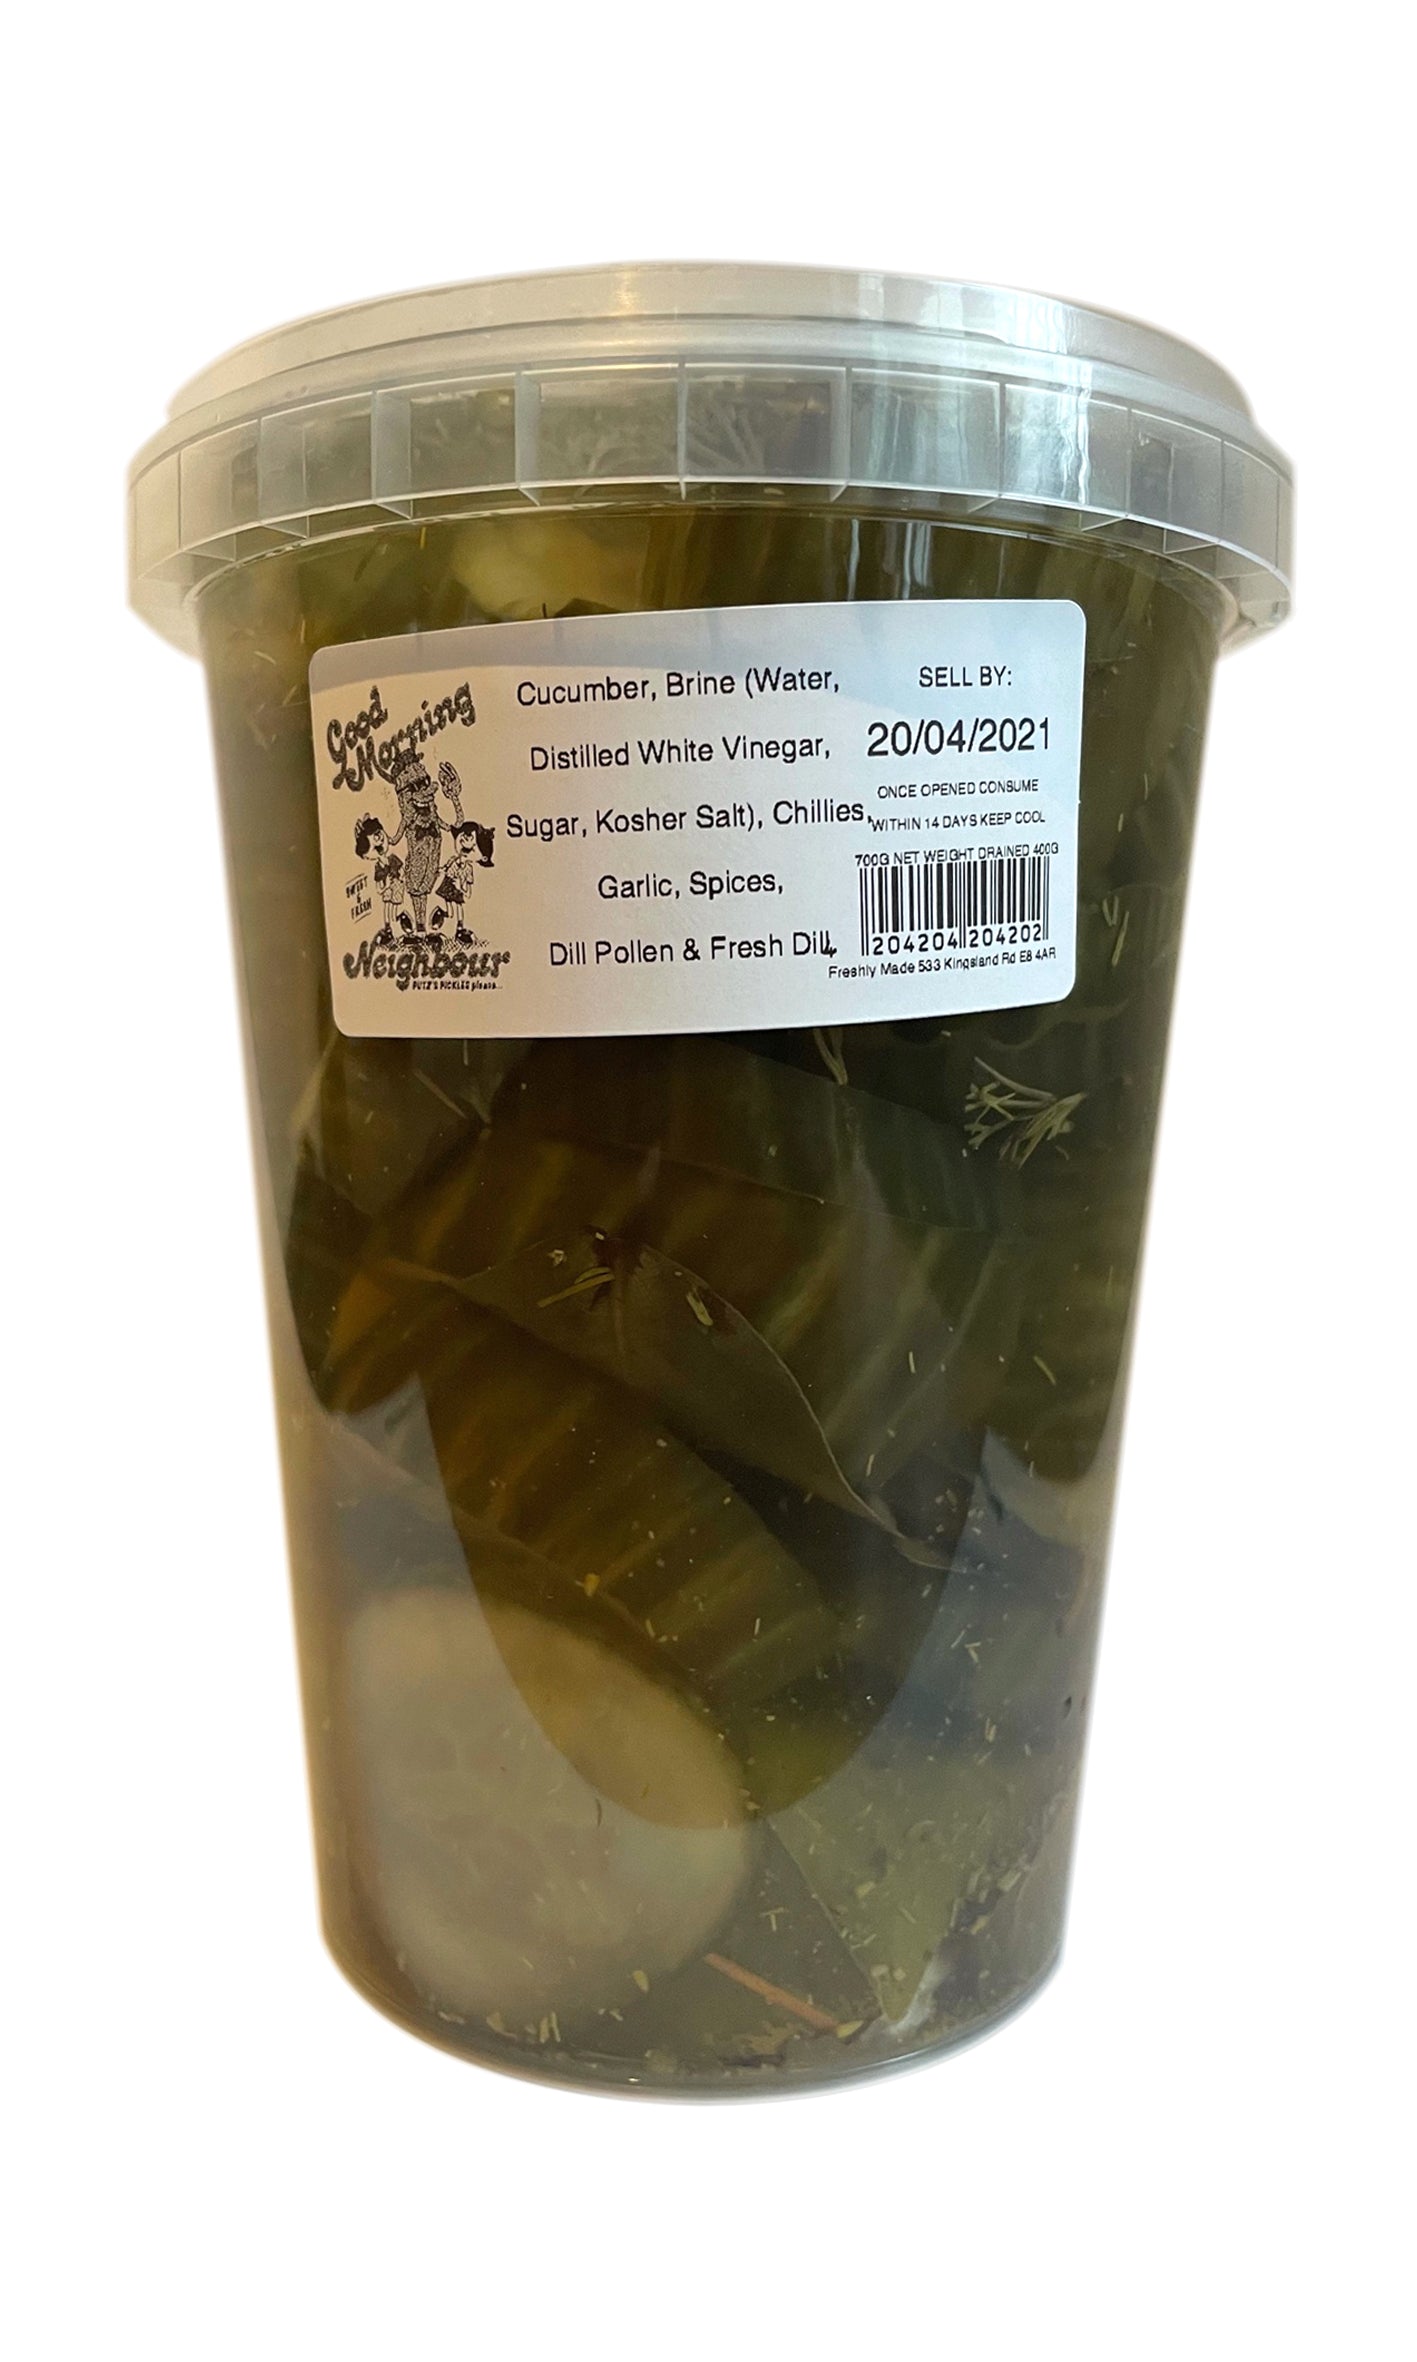 Good Morning Neighbour - classic Putz's dill pickles - 700g